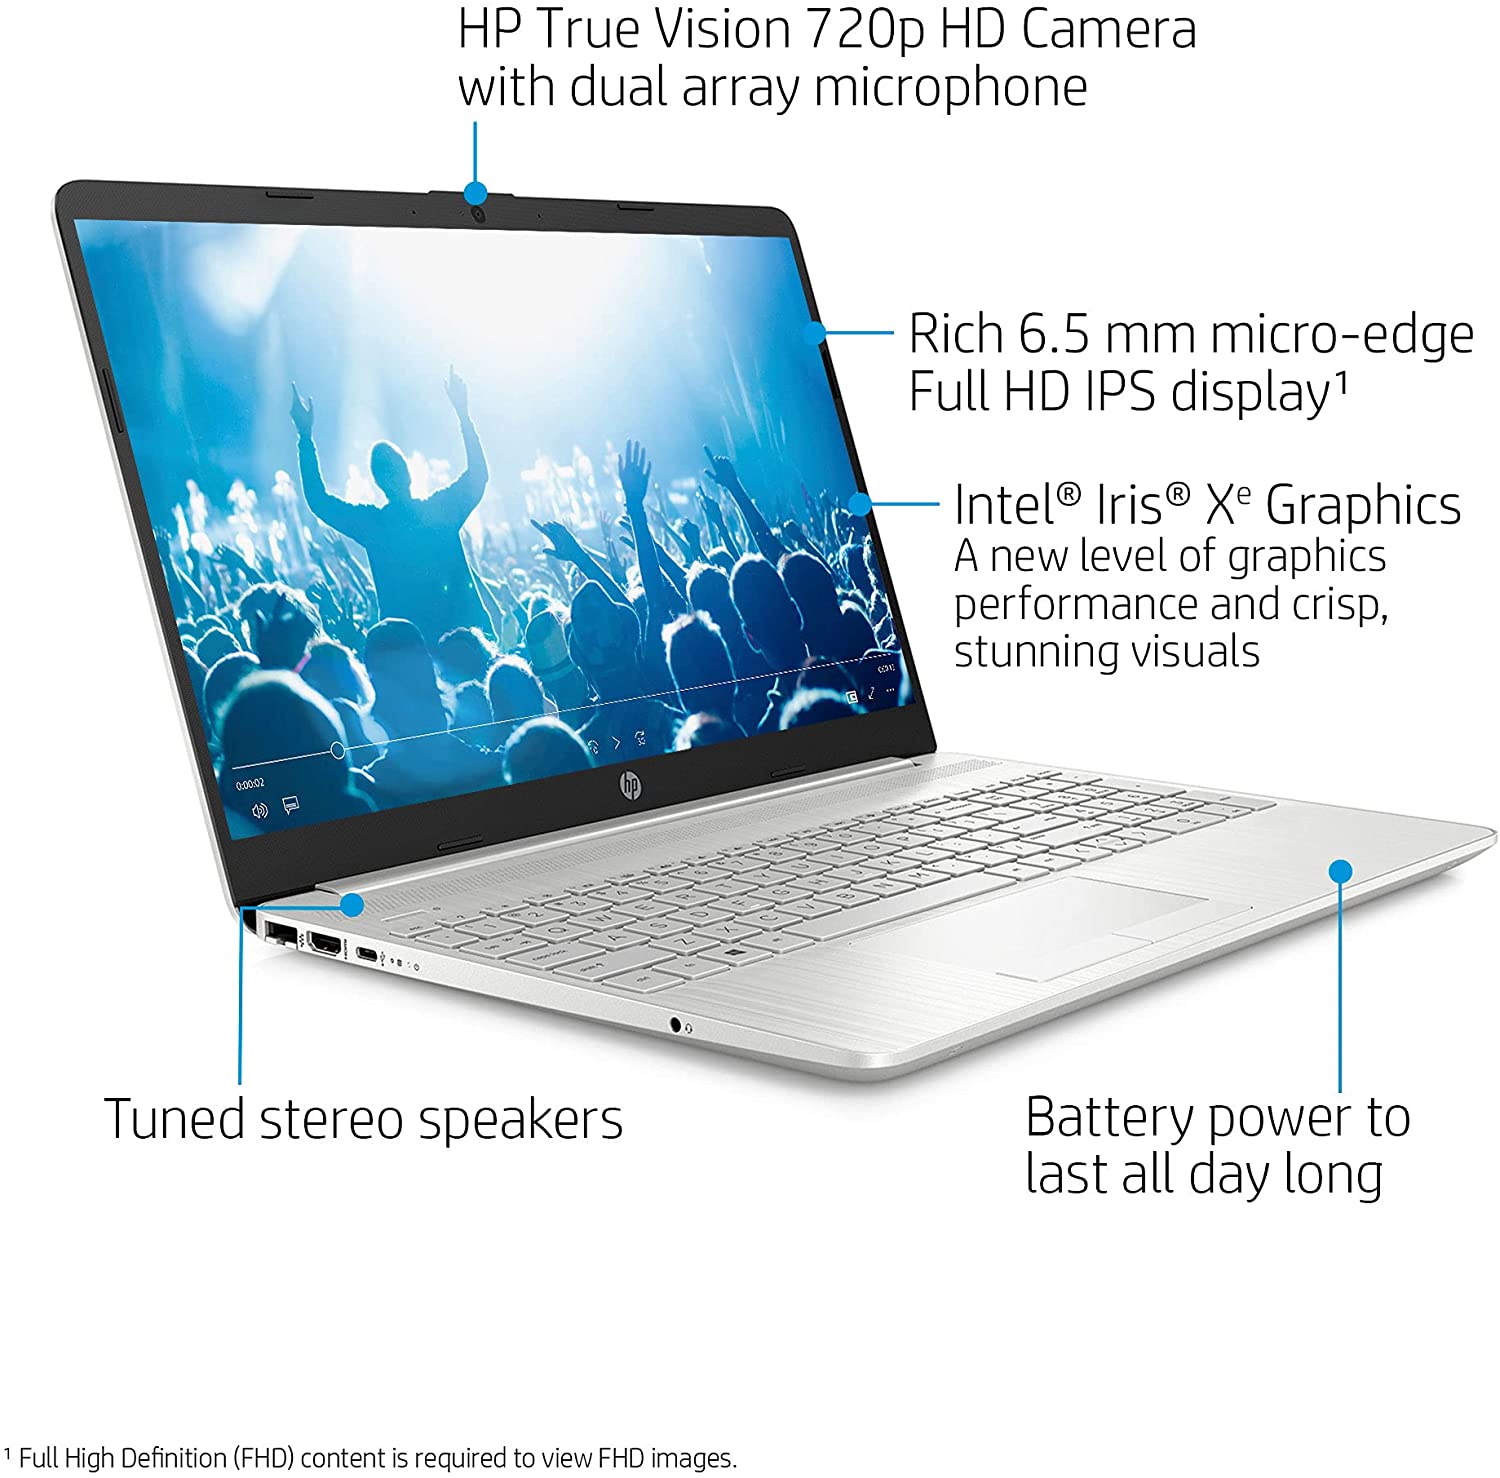 Newest HP 15 6 FHD IPS Flagship Laptop 11th Gen Intel 4 Core i5 1135G7 Up to 4 2GHz Beat i7 1060G7 8GB DDR4 512GB PCIe SSD Iris Xe Graphics WiFi Bluetooth USB C Windows 10 ABYS Mouse PAD - DealYaSteal